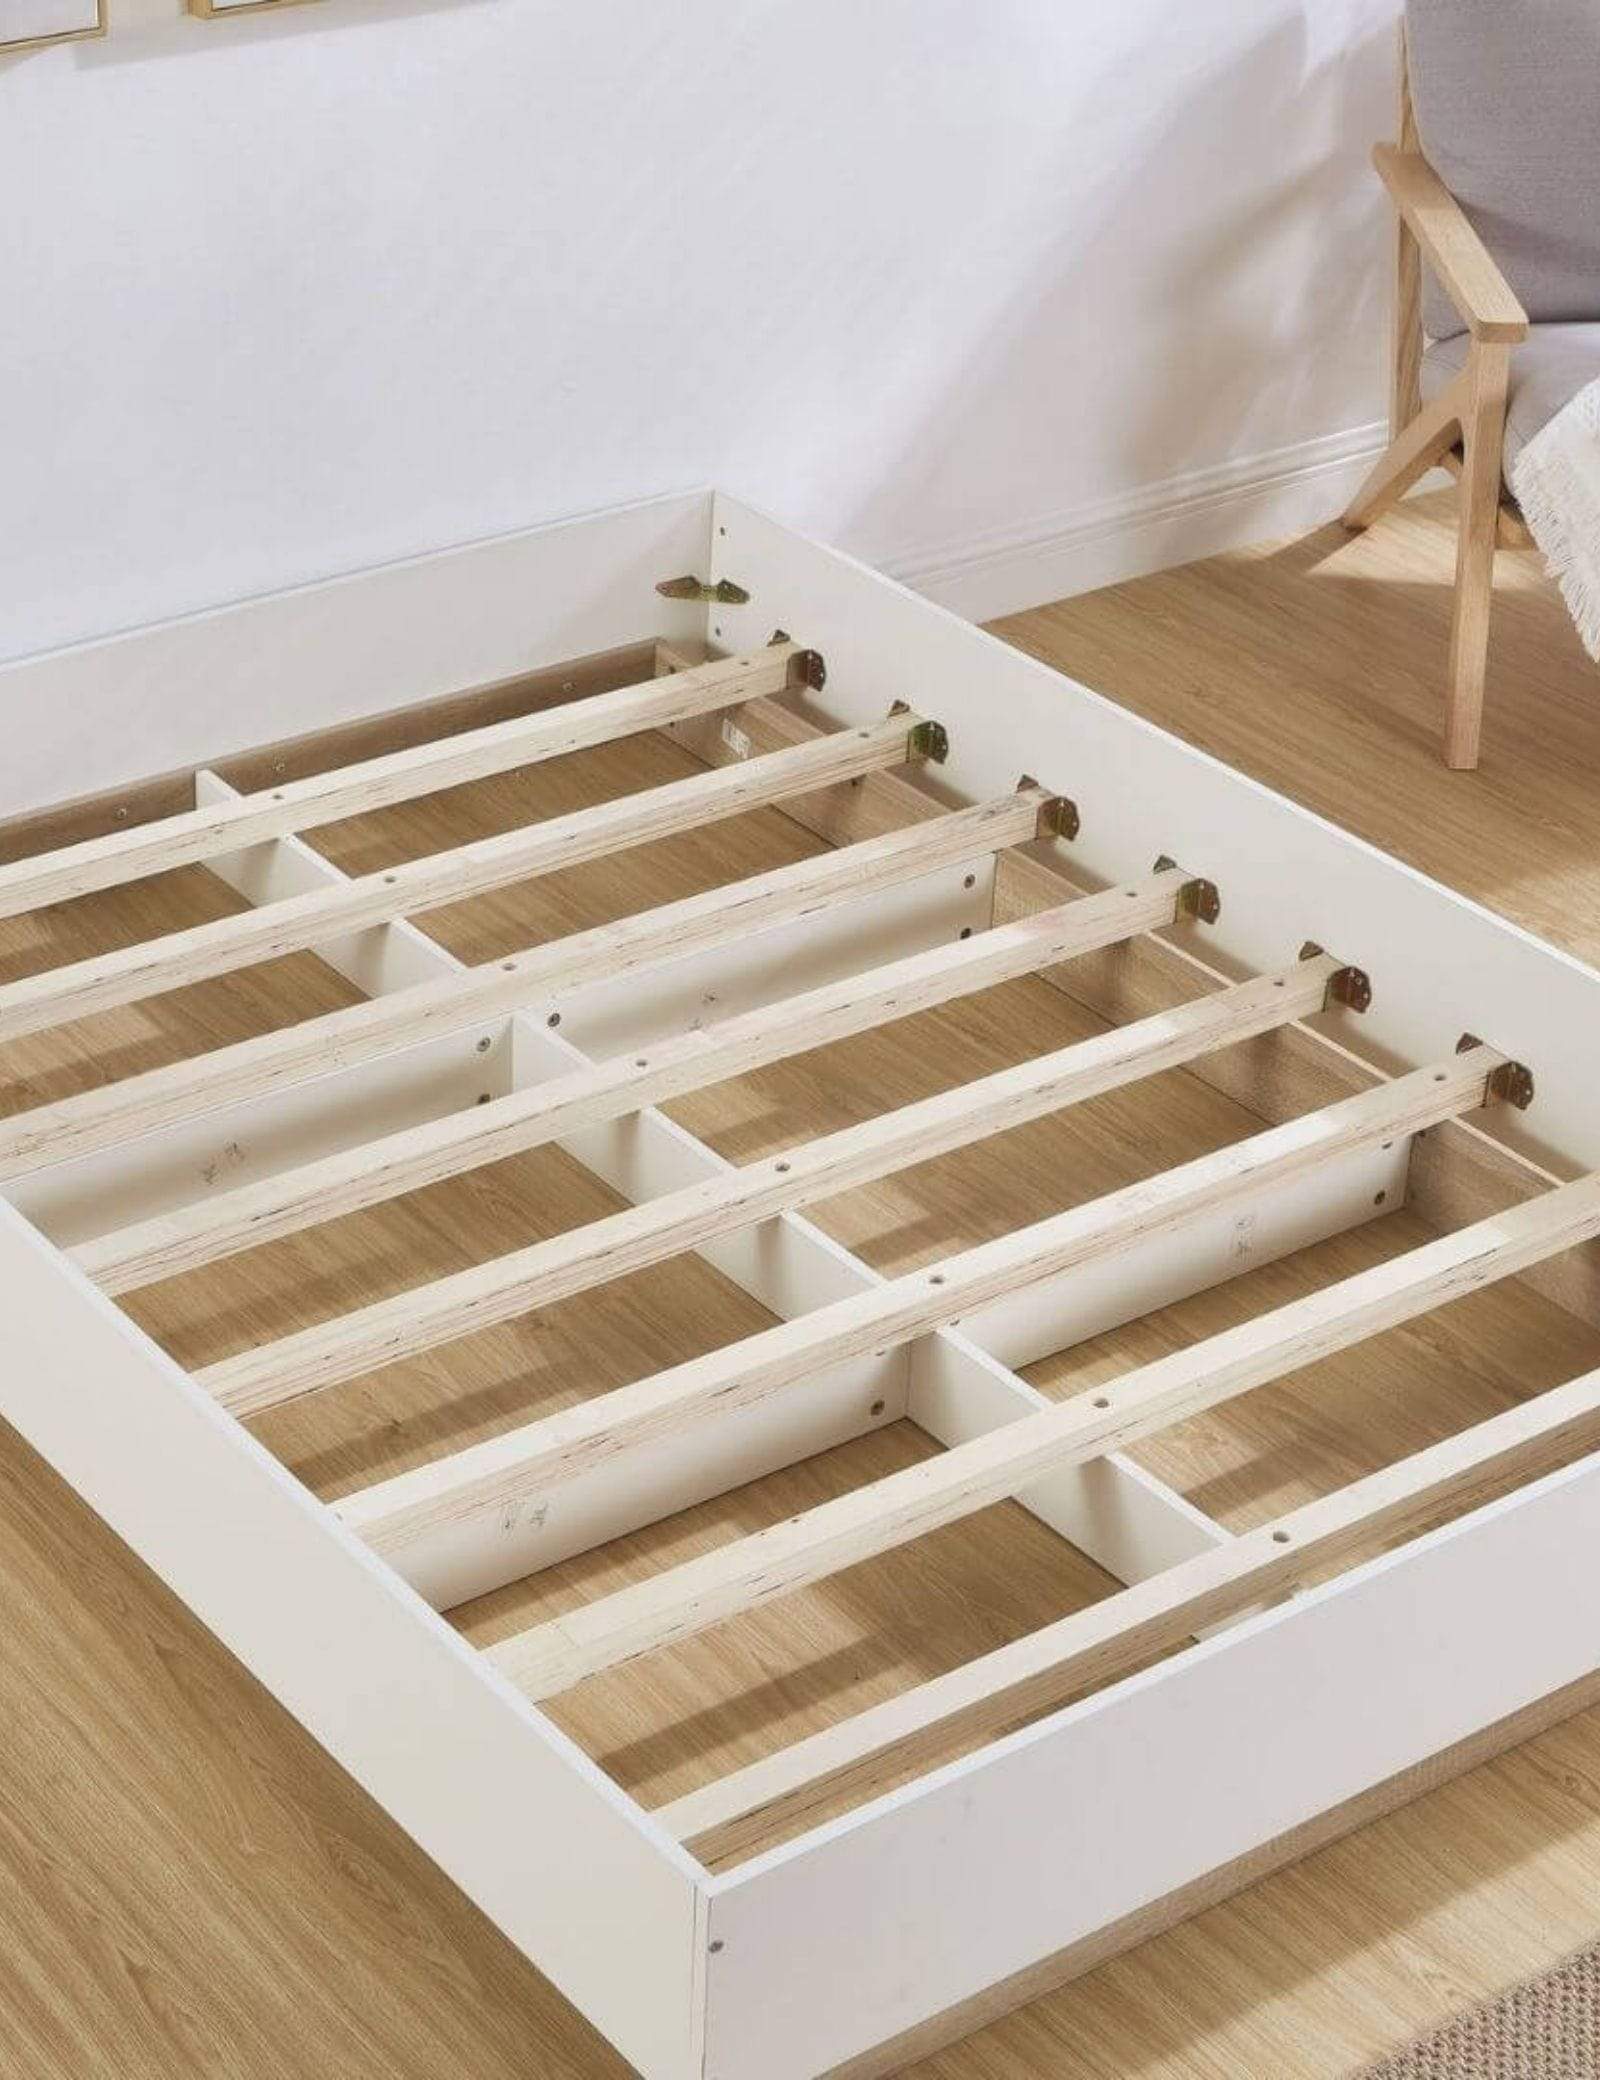 Aiden Industrial Contemporary White Oak Bed Base Bed Frame - Newstart Furniture